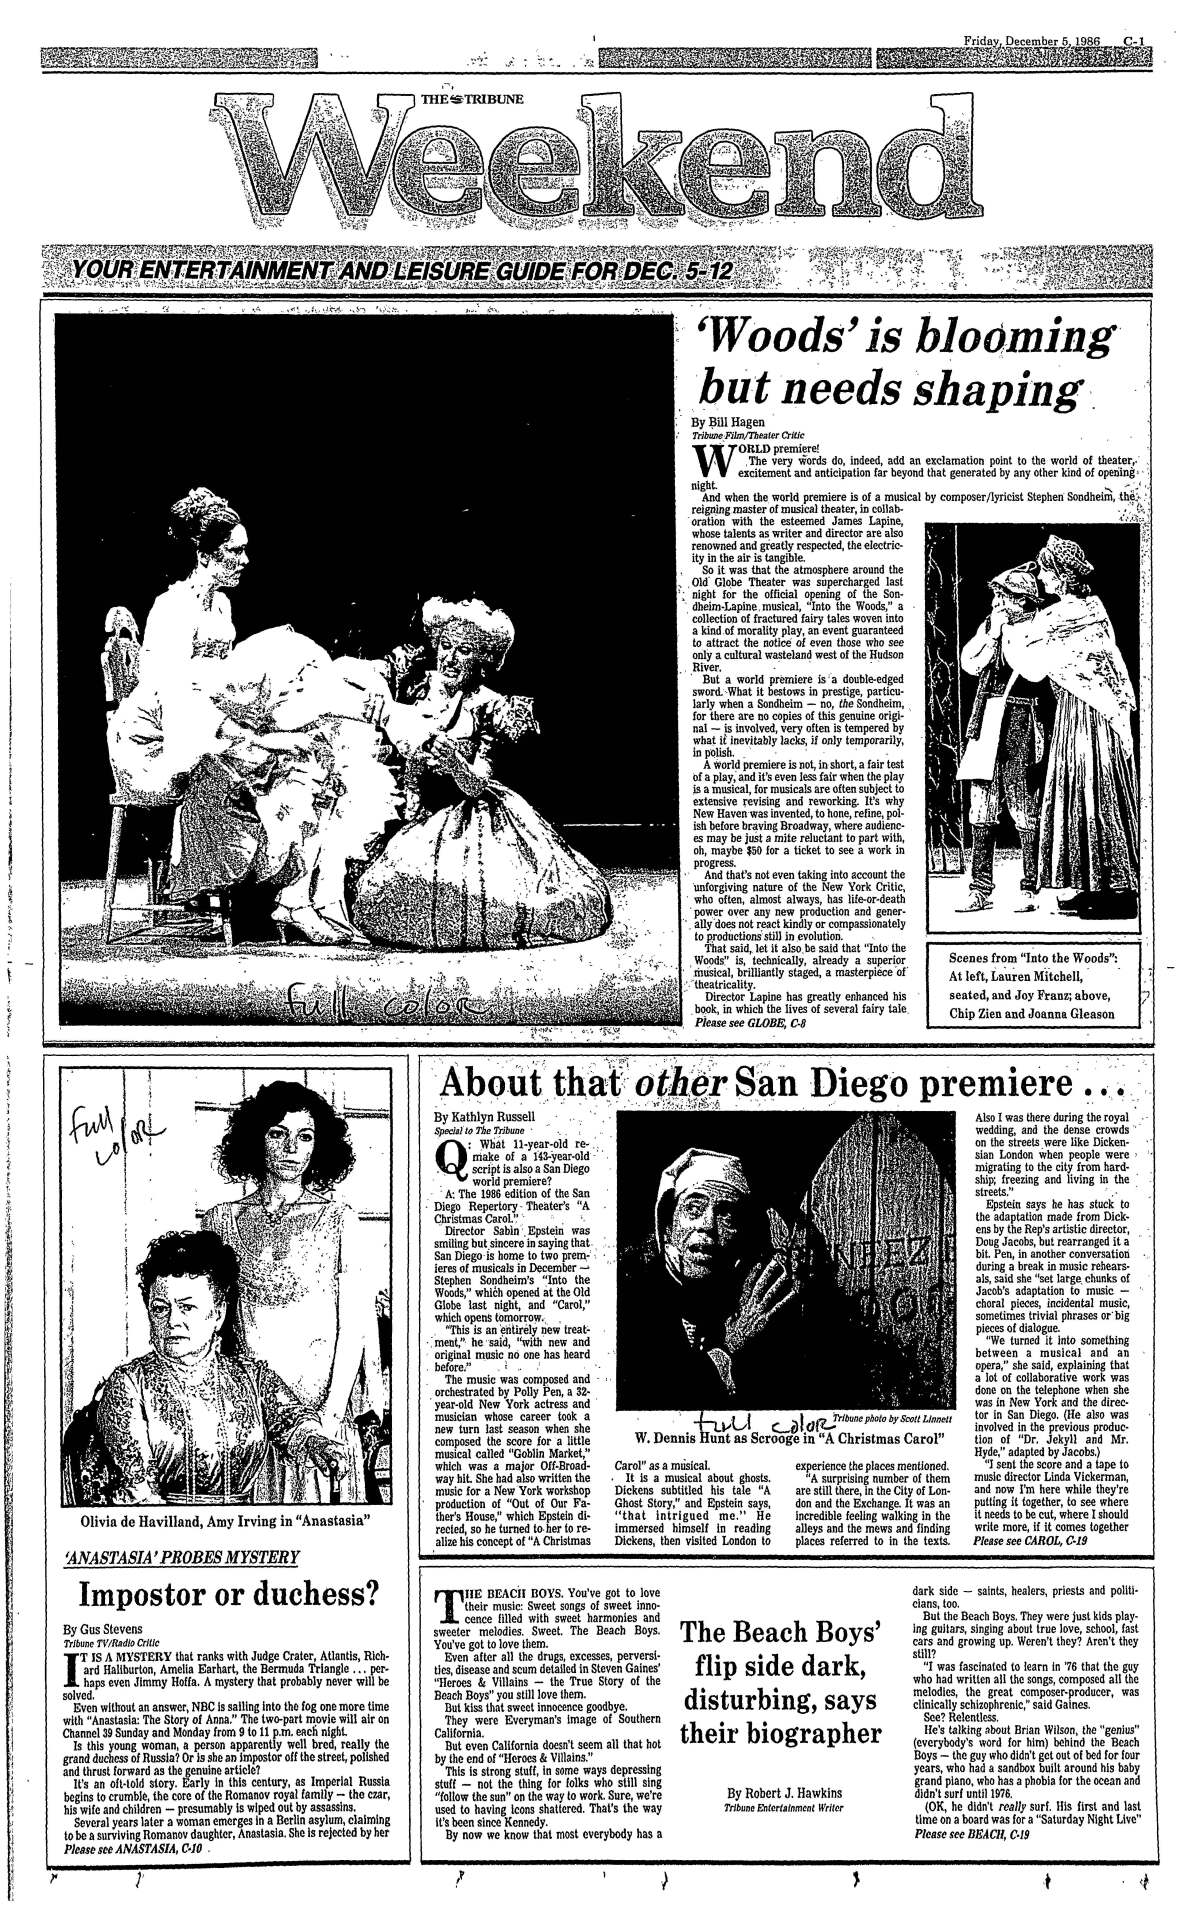 Bill Hagen's review of the world premiere of Stephen Sondheim's "Into the Woods" published Dec. 5, 1986.